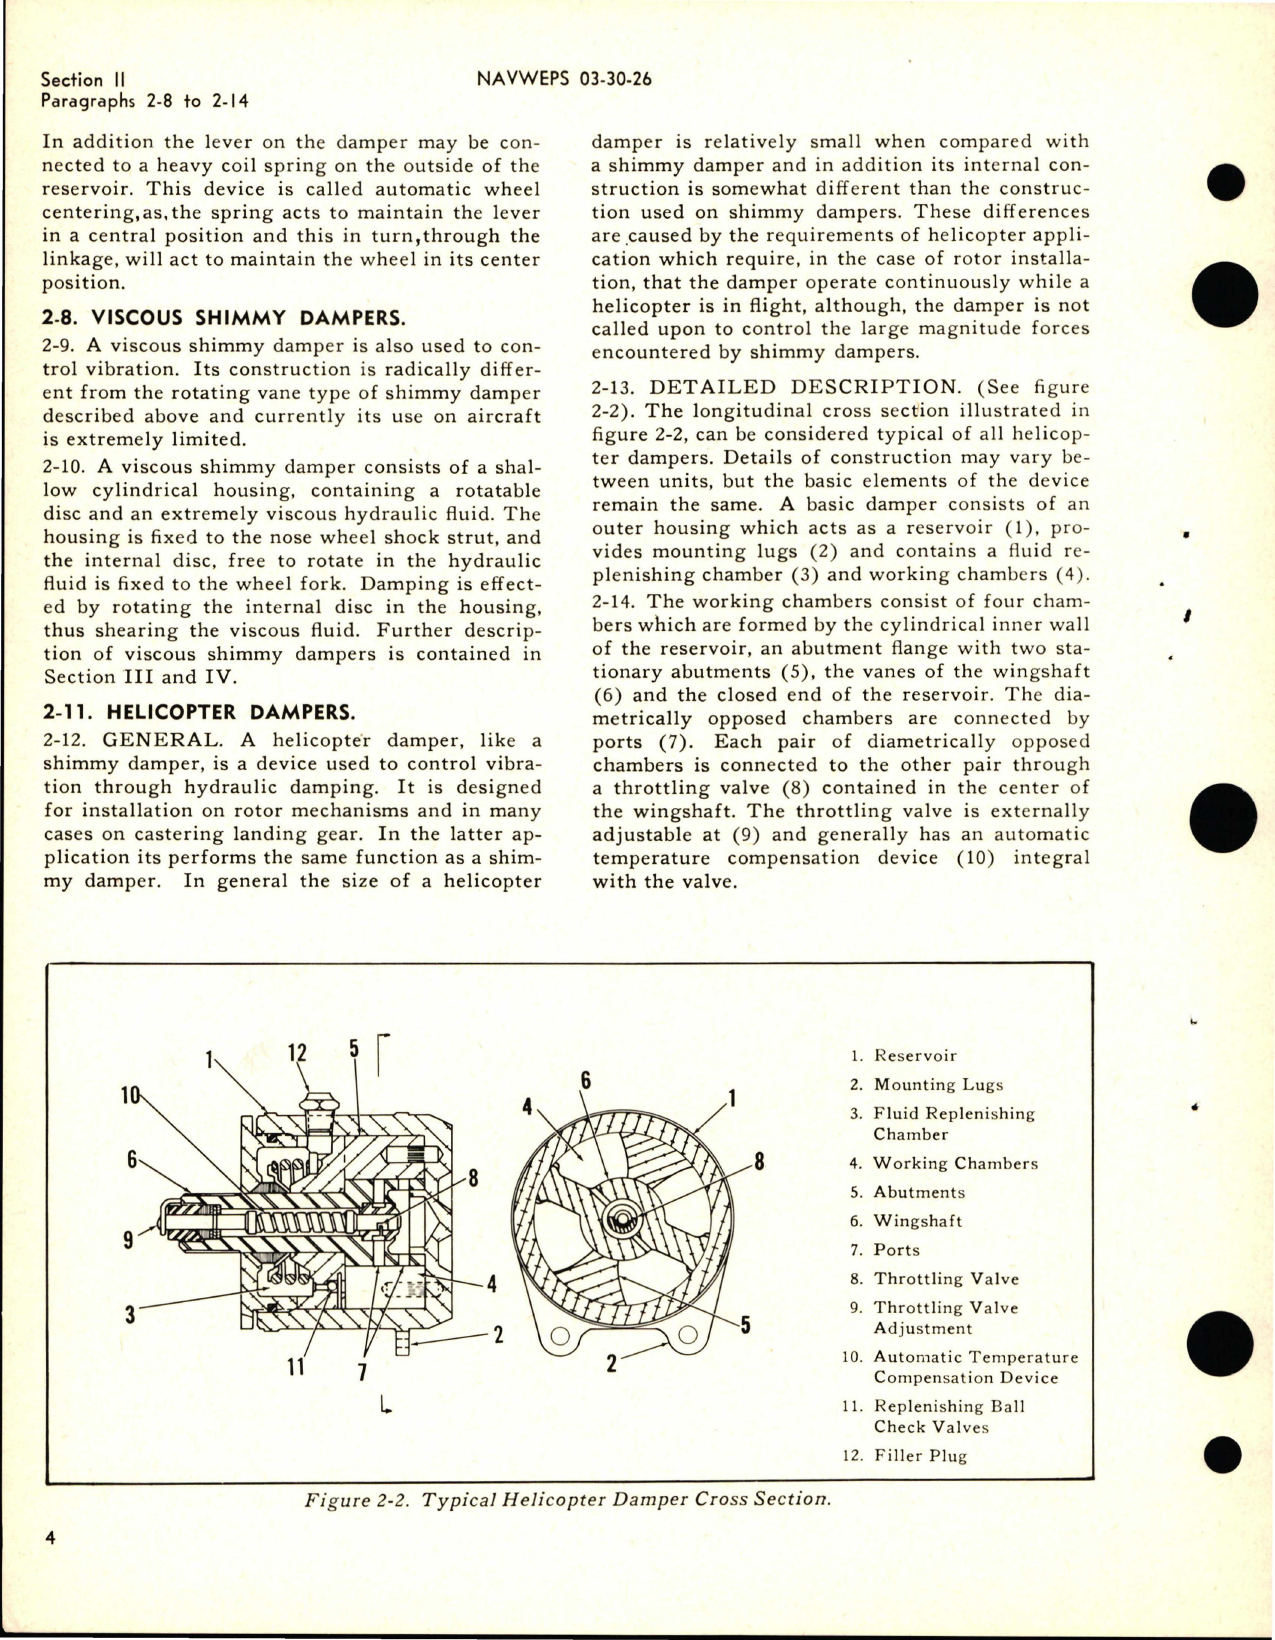 Sample page 8 from AirCorps Library document: Operation, Service and Overhaul Instructions with Illustrated Parts for Shimmy Dampers - Helicopter Dampers - Steer Dampers